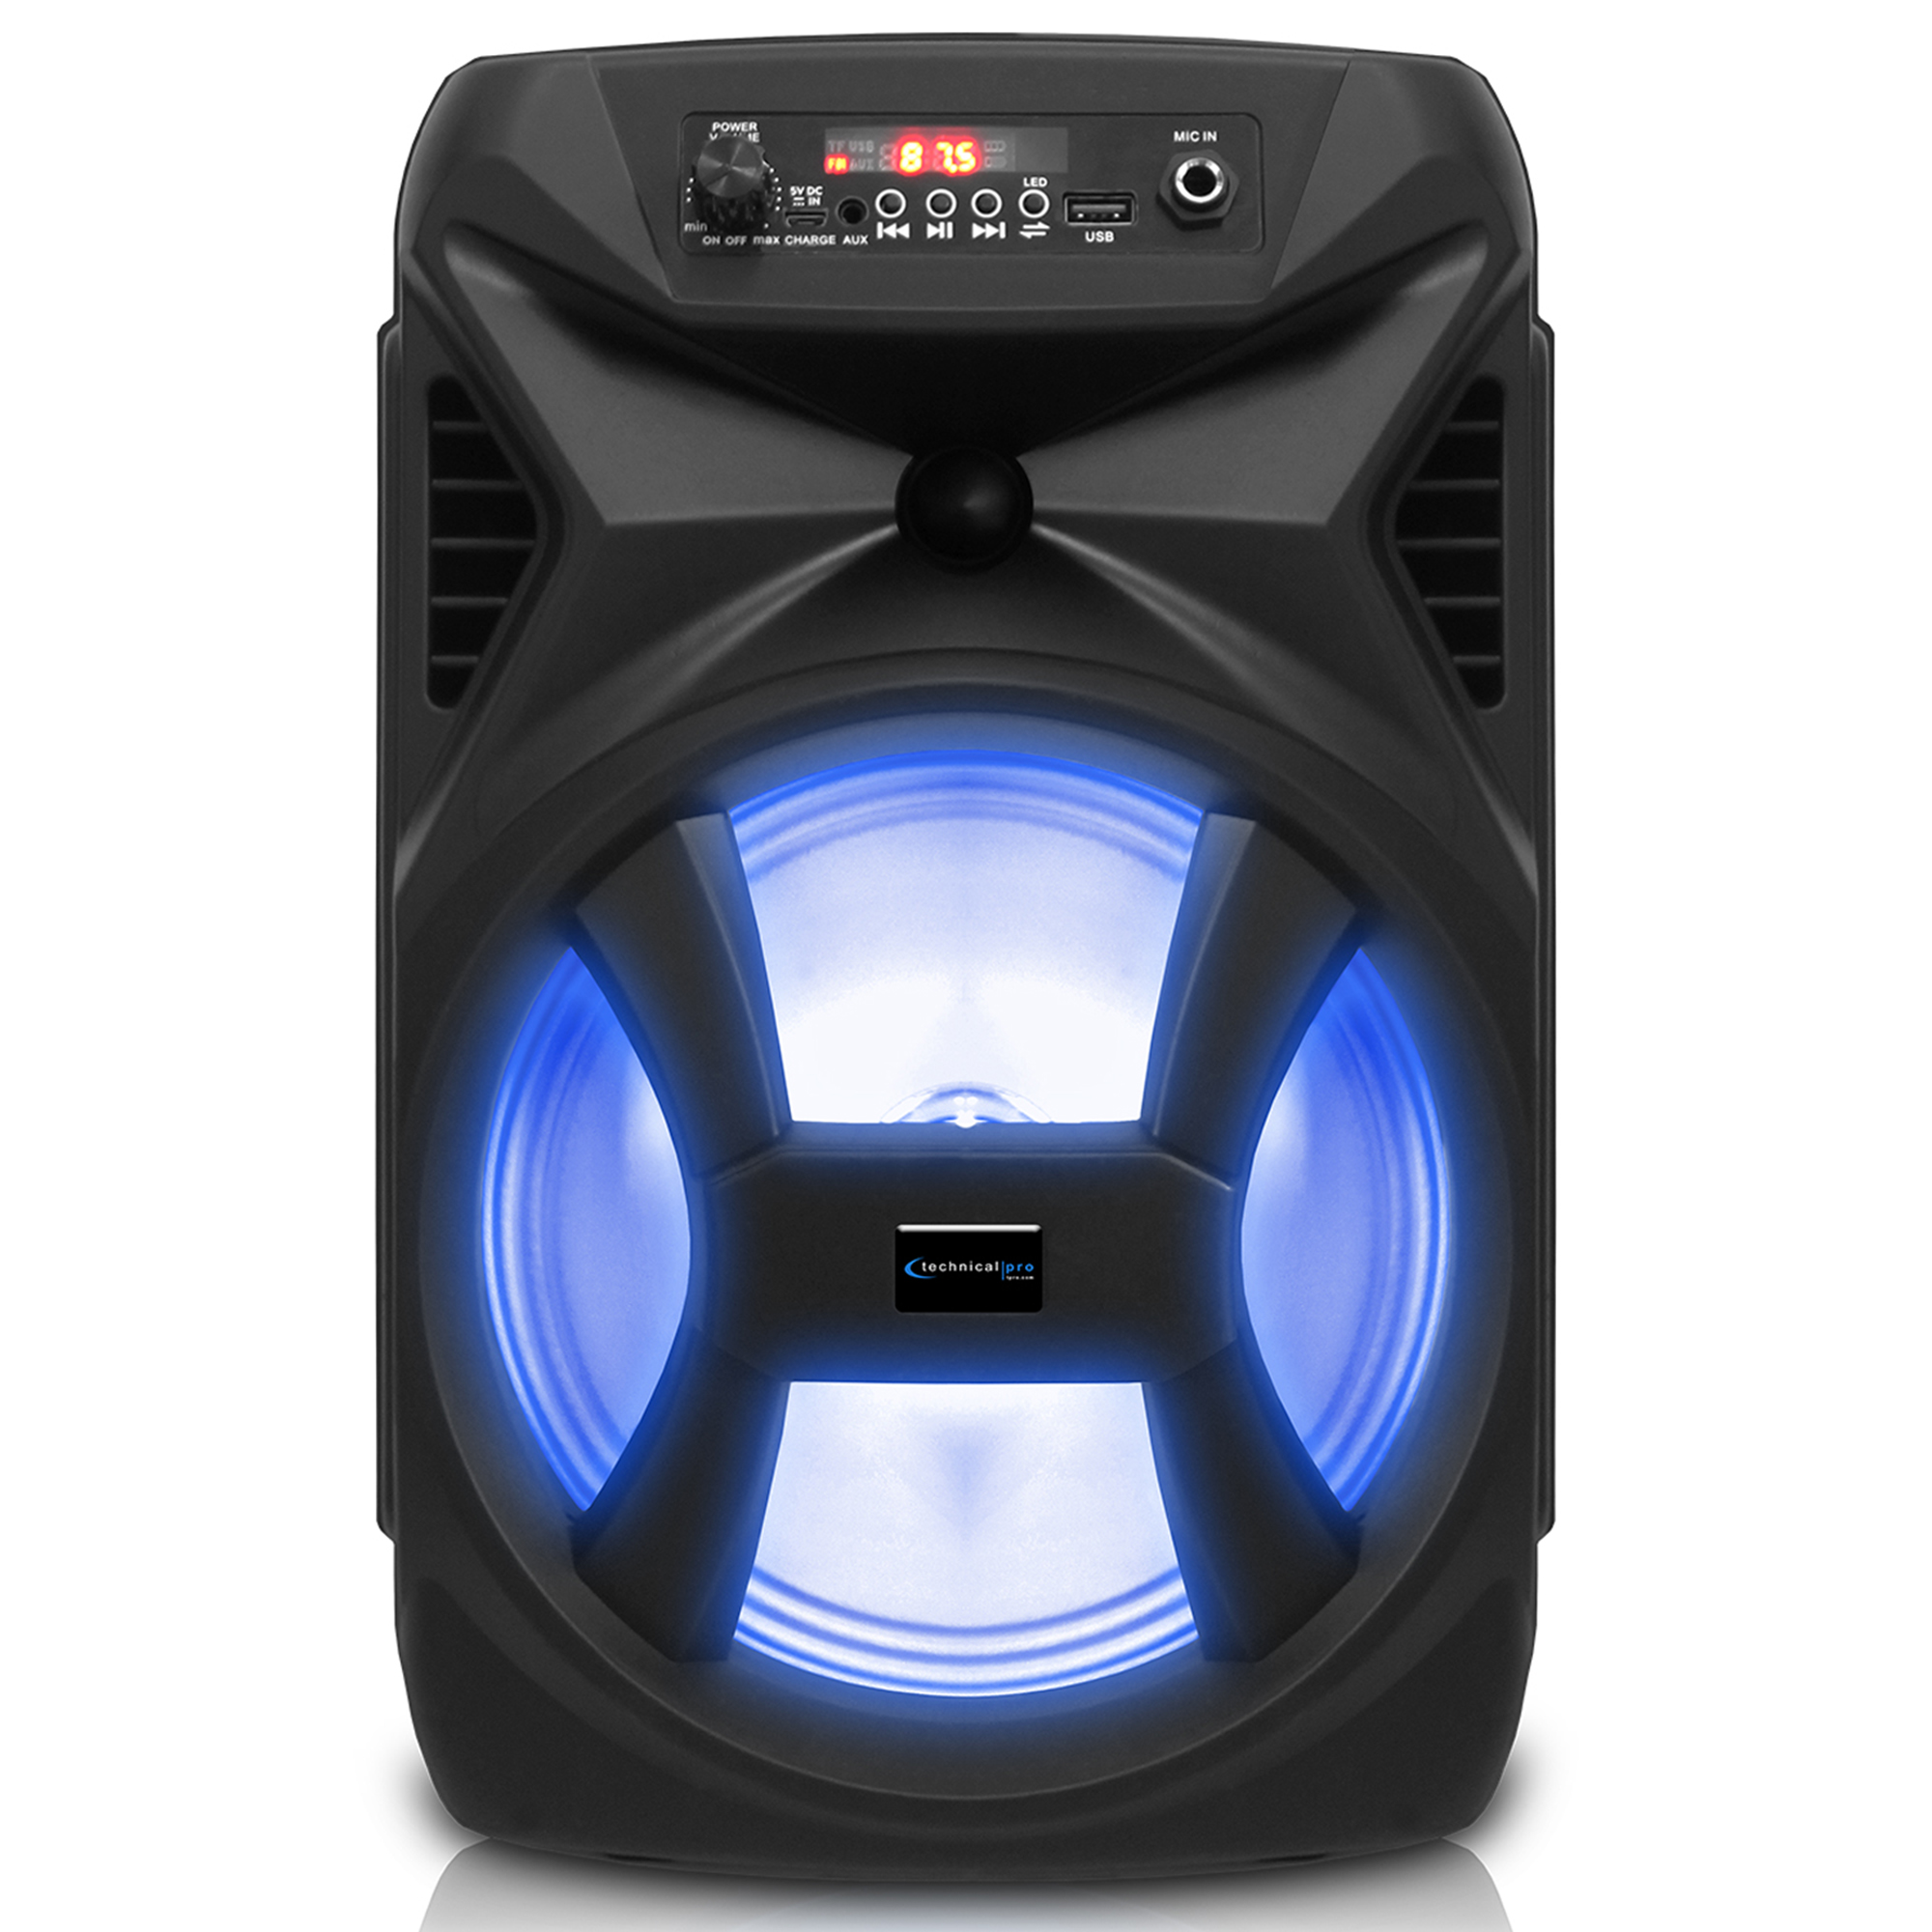 Technical Pro 8" Portable 500 Watts Bluetooth Speaker w/ Woofer and Tweeter, Festival PA LED Speaker, USB Card Input, - image 1 of 7